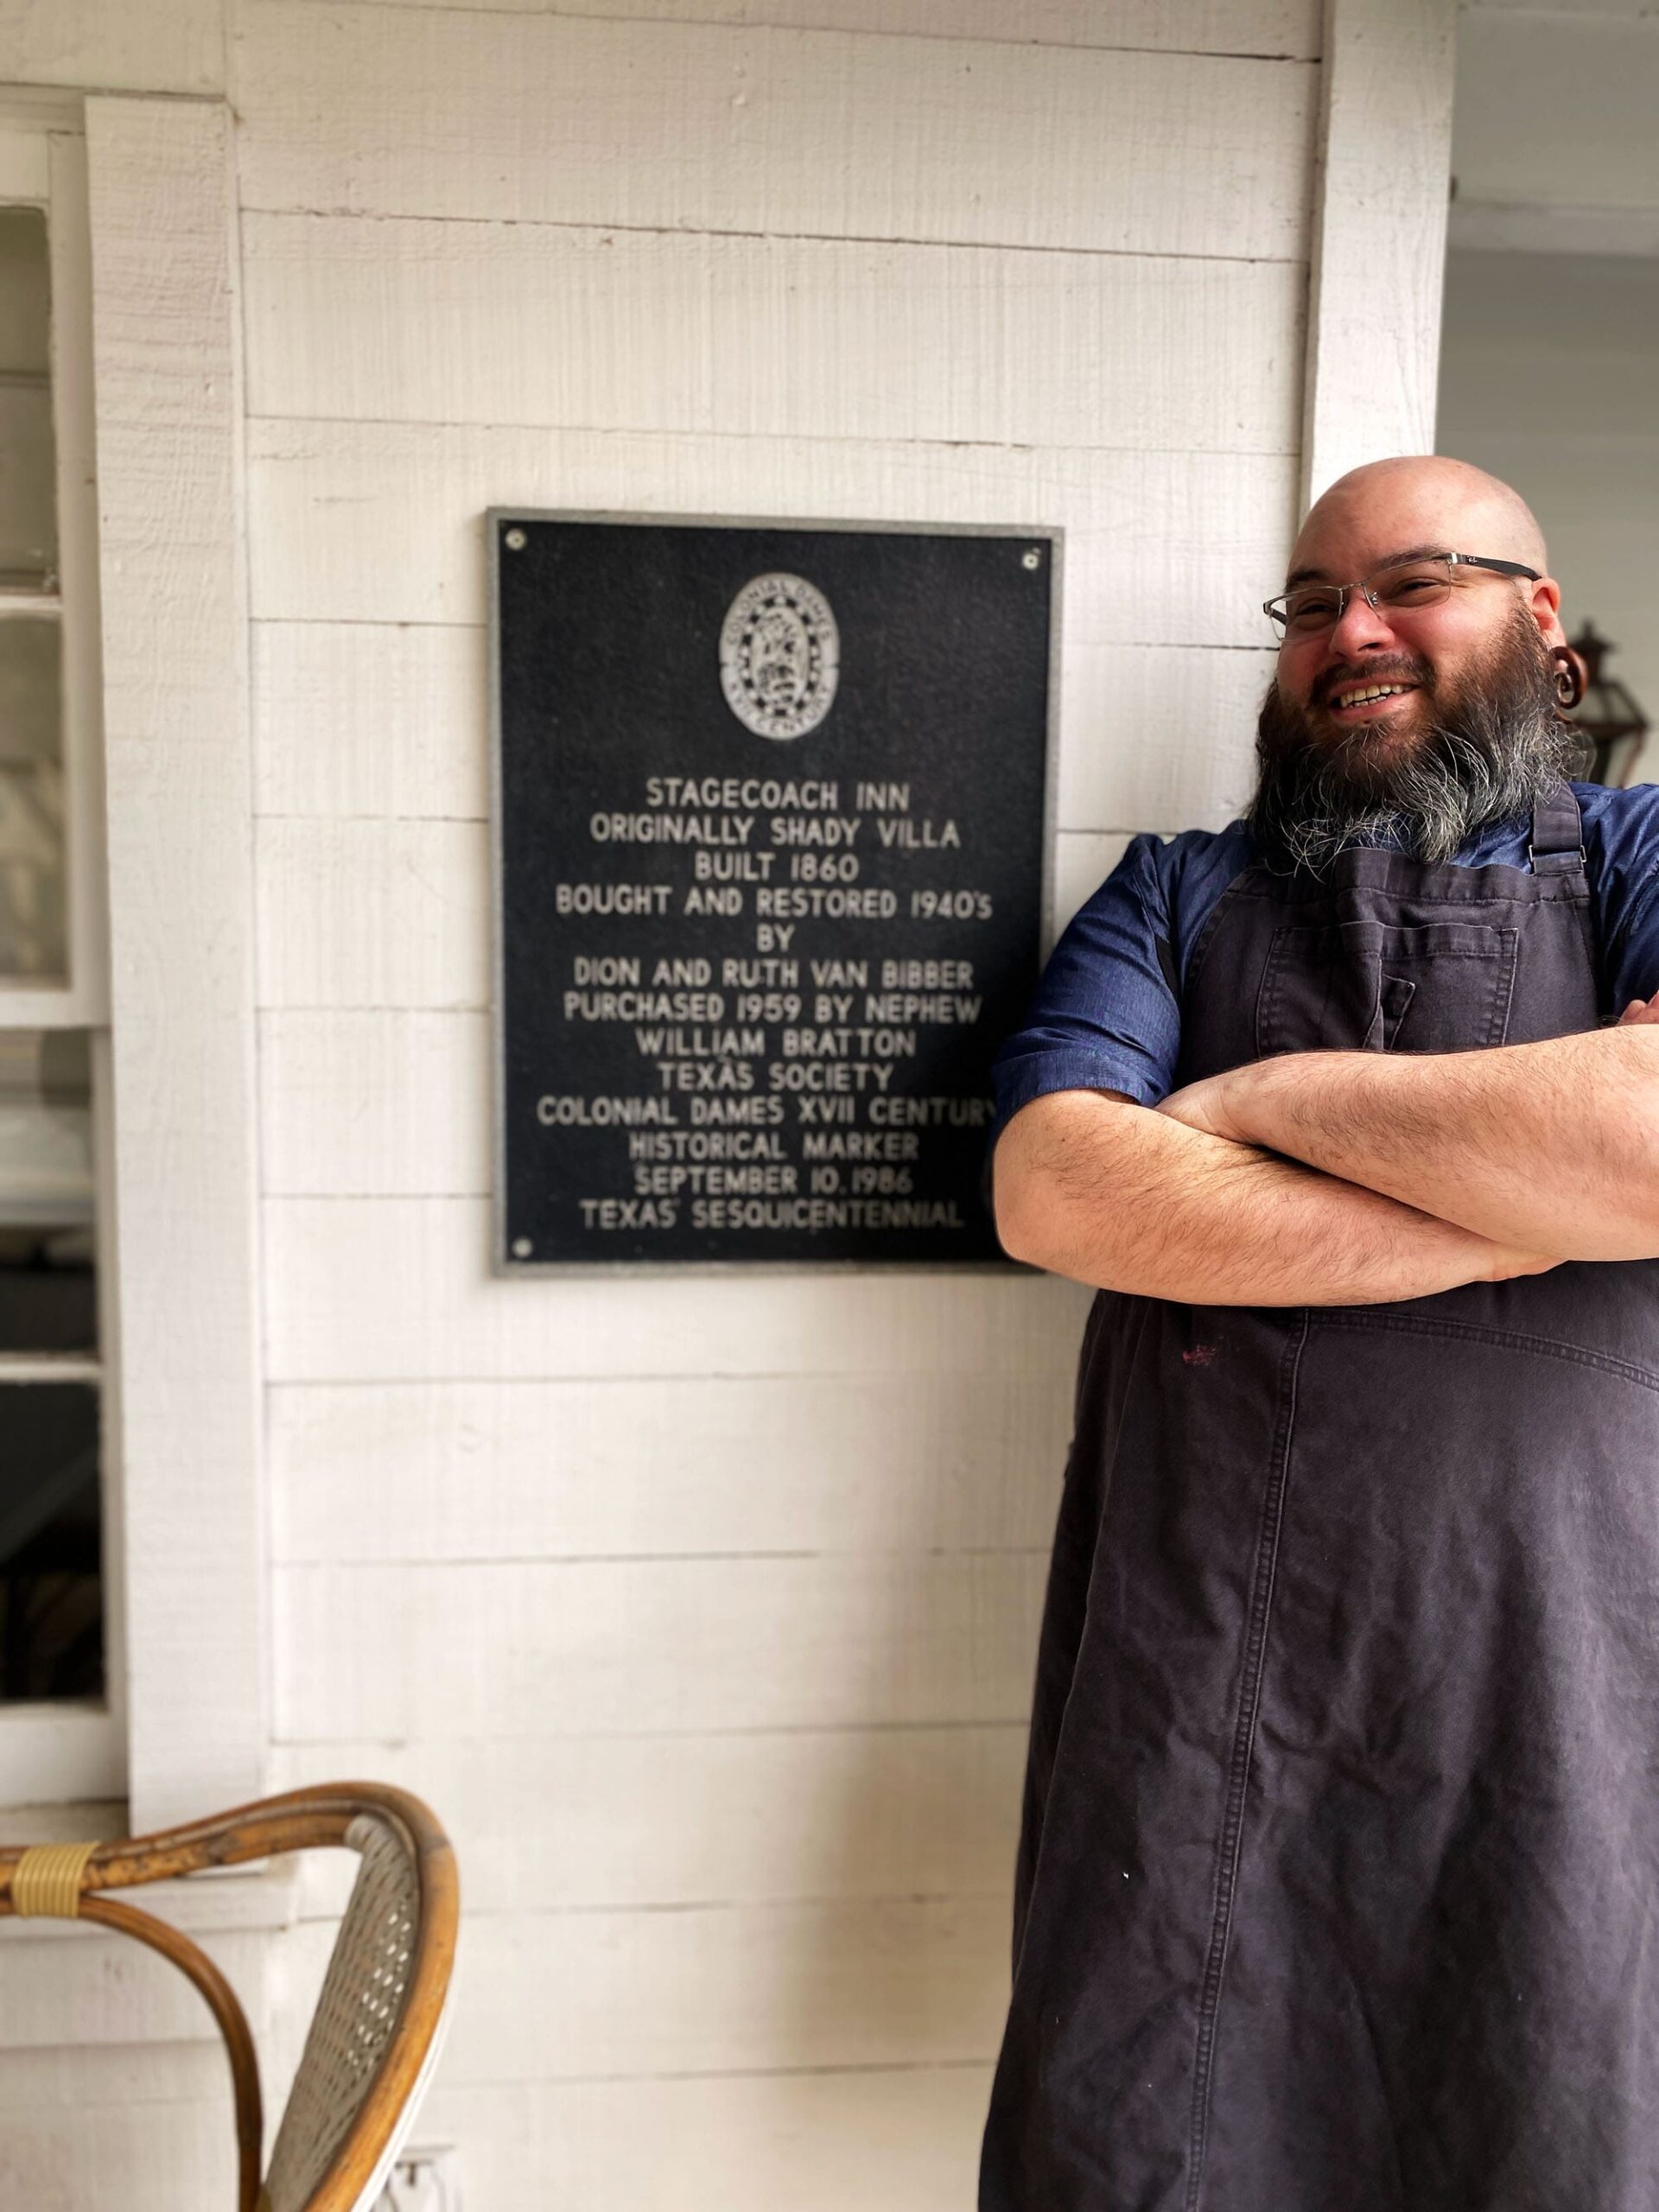 Executive Chef Patrick Dunlop smiling outside his restaurant, Stagecoach, in Salado, Texas.